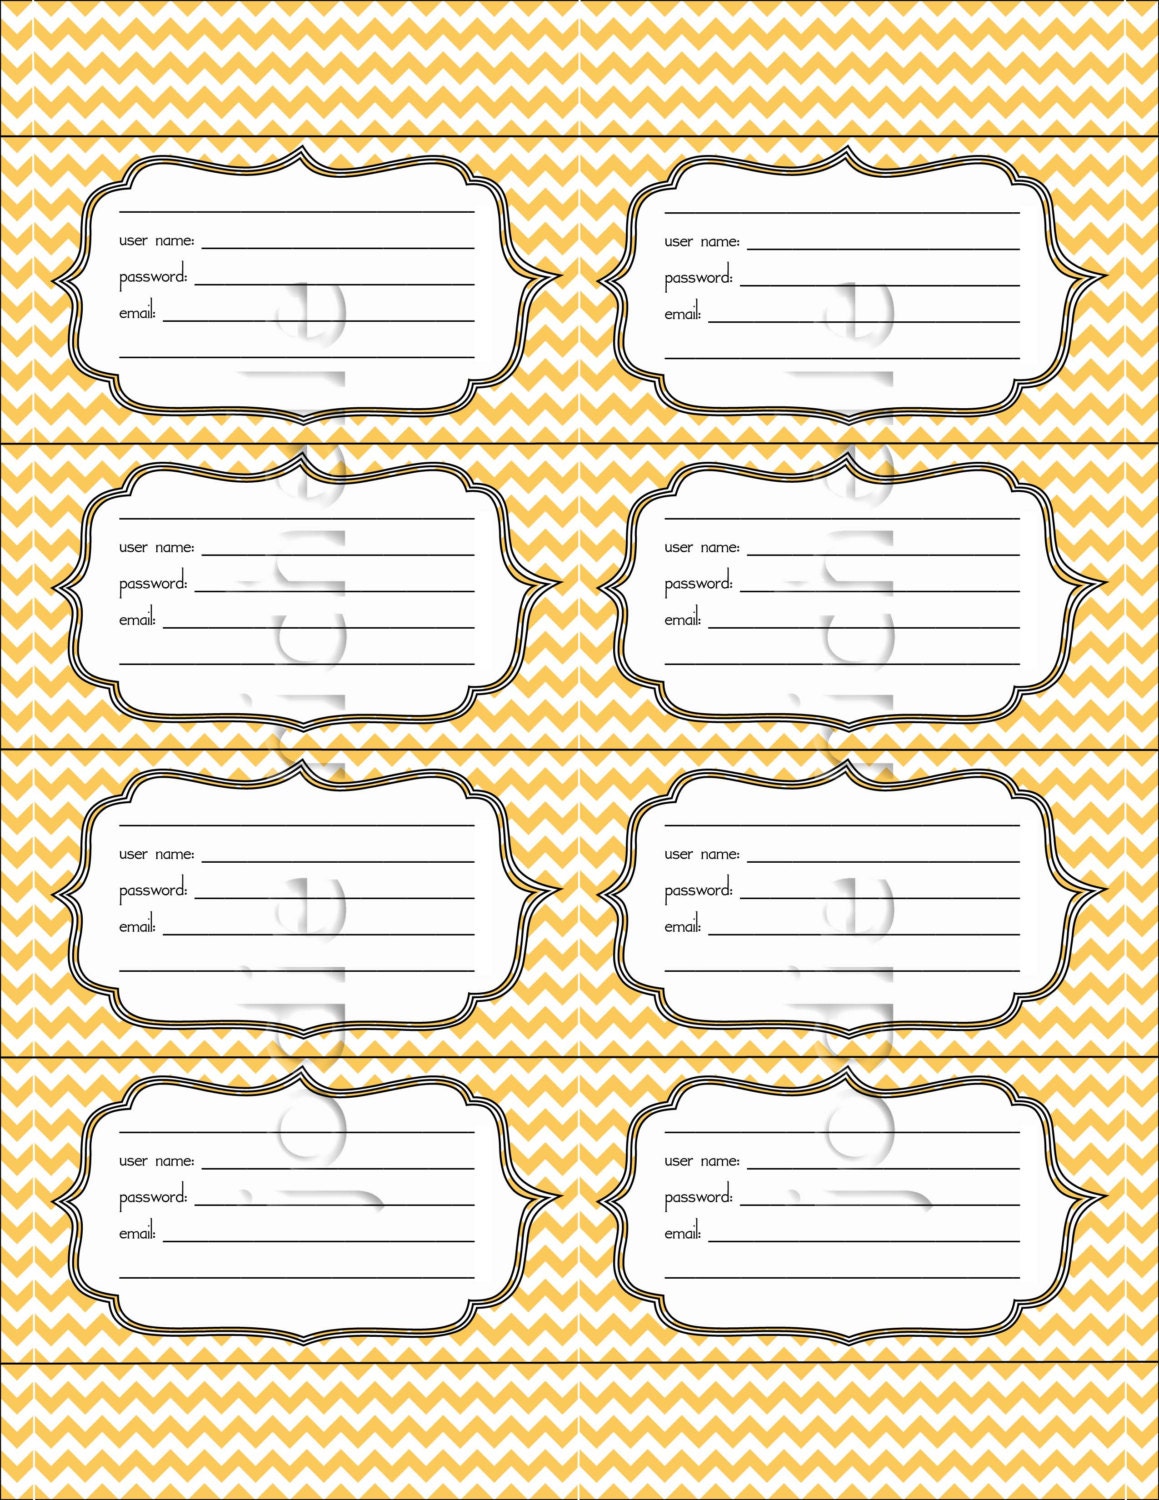 printable-rolodex-password-cards-in-butter-yellow-chevron